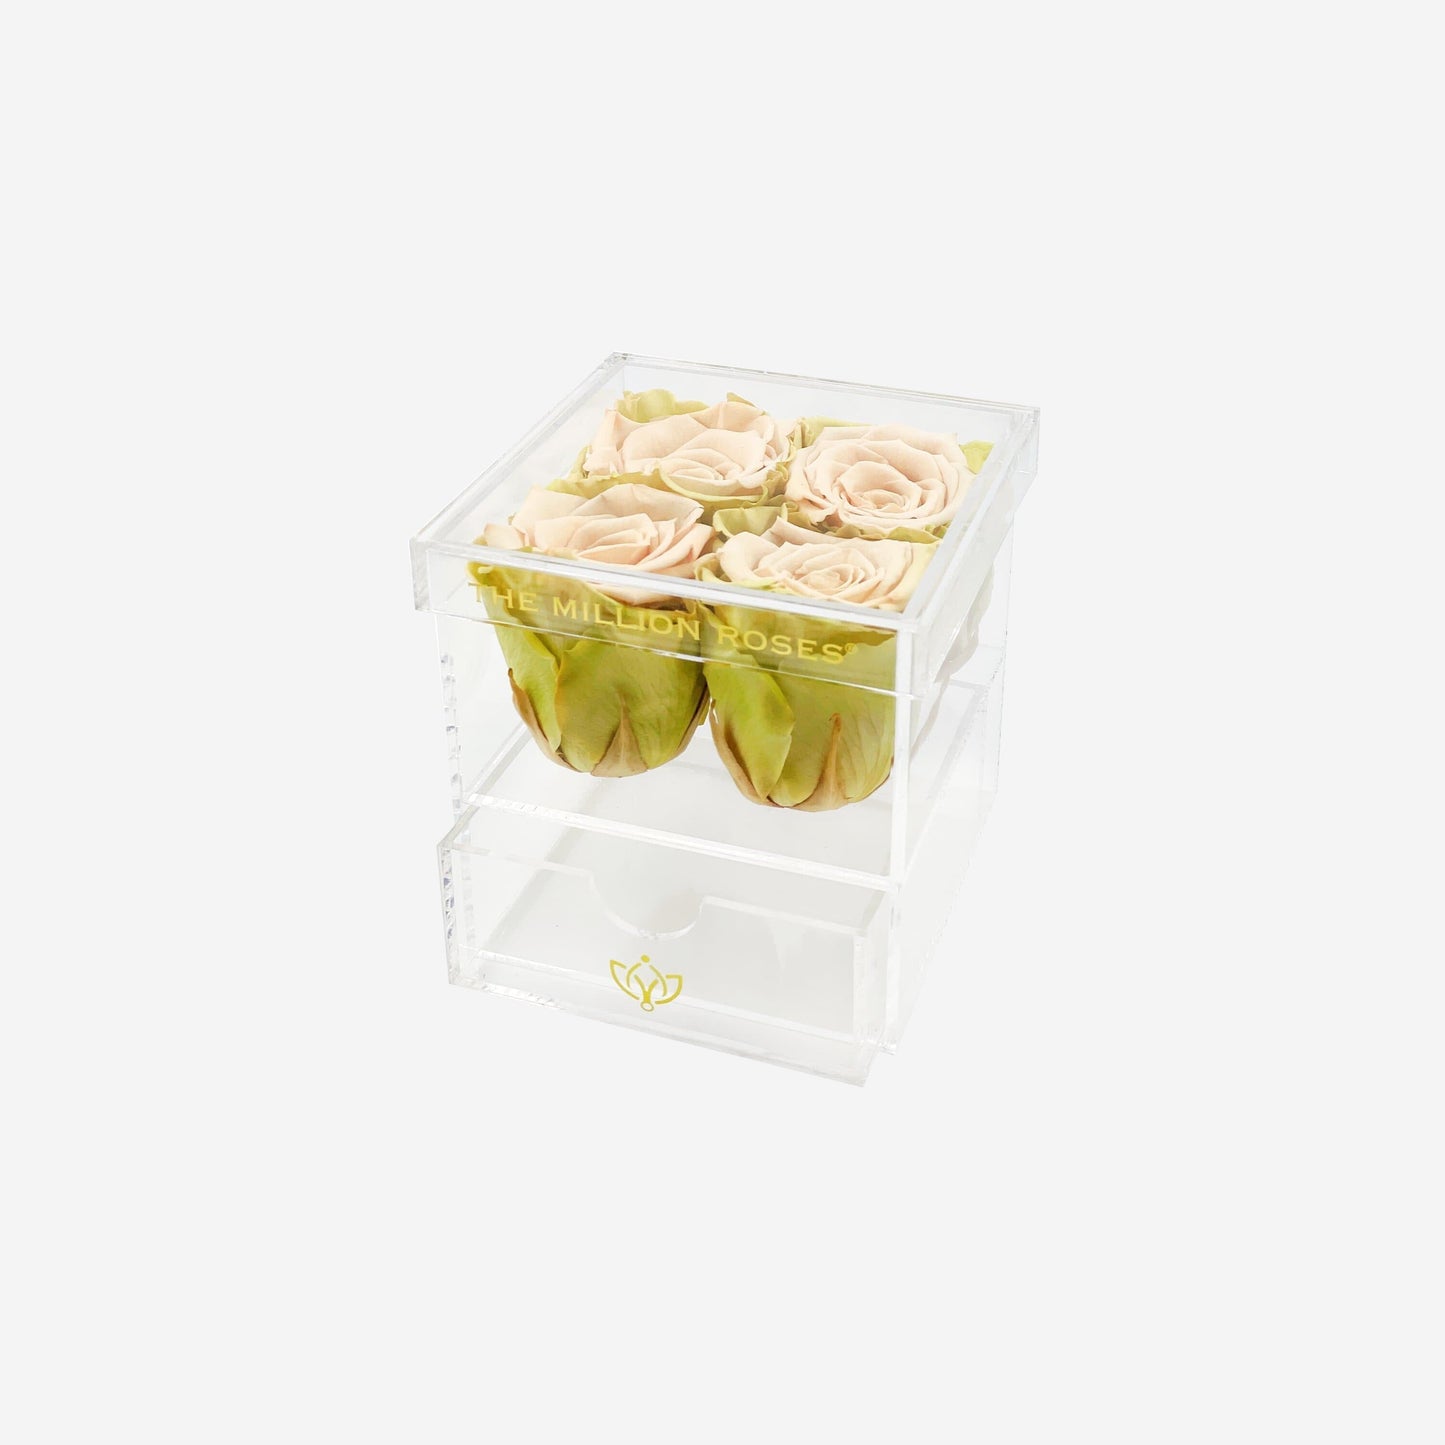 Acrylic 4 Drawer Box | Fawn Bicolor Roses - The Million Roses